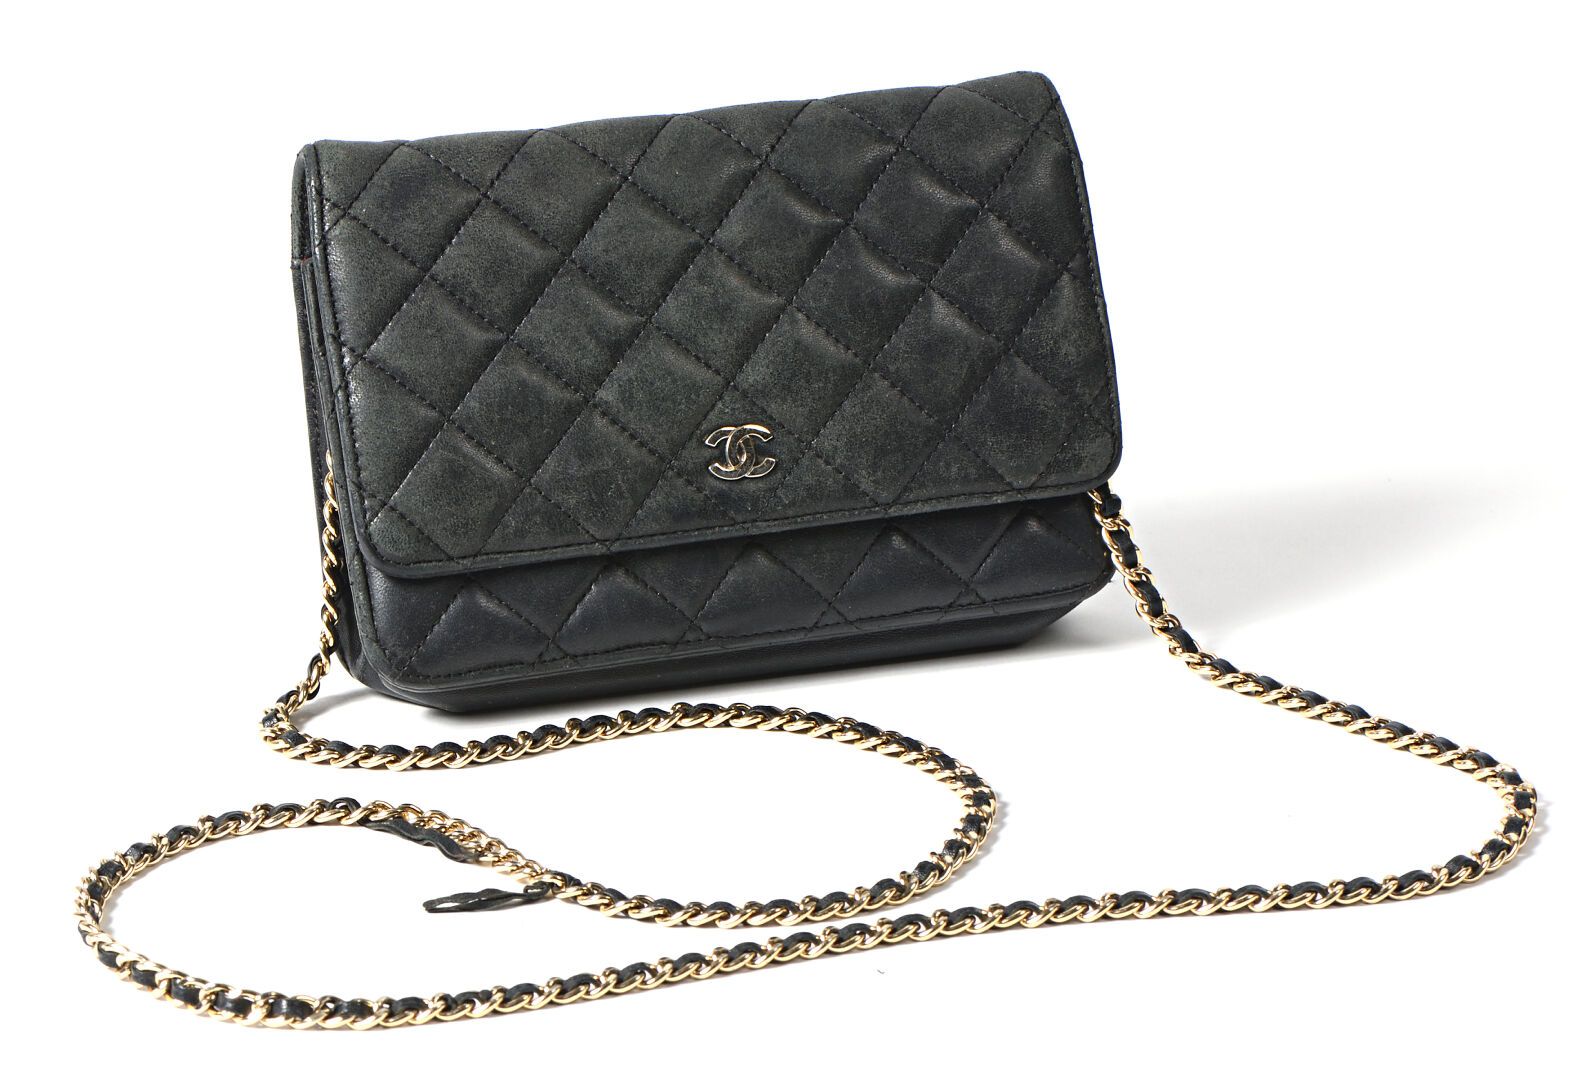 Vintage Chanel Caviar Flap Bag - Shop Jewelry, Watches & Accessories